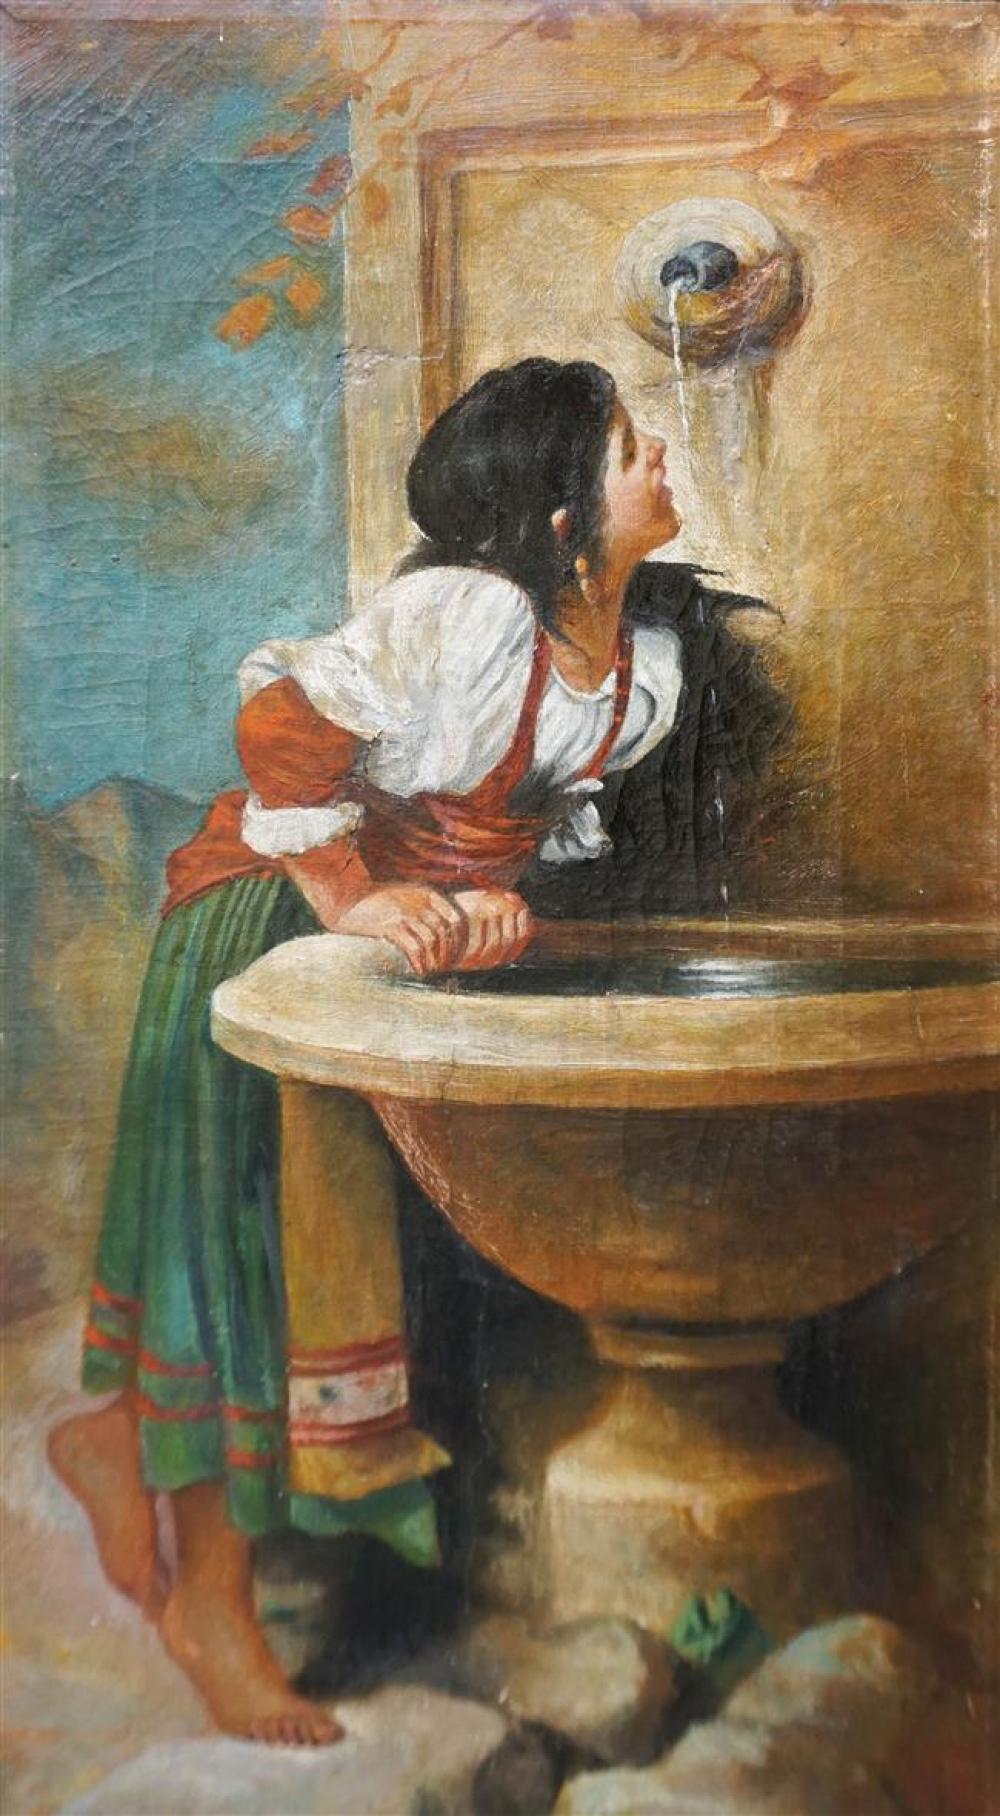 LADY AT A WATER FOUNTAIN, OIL ON